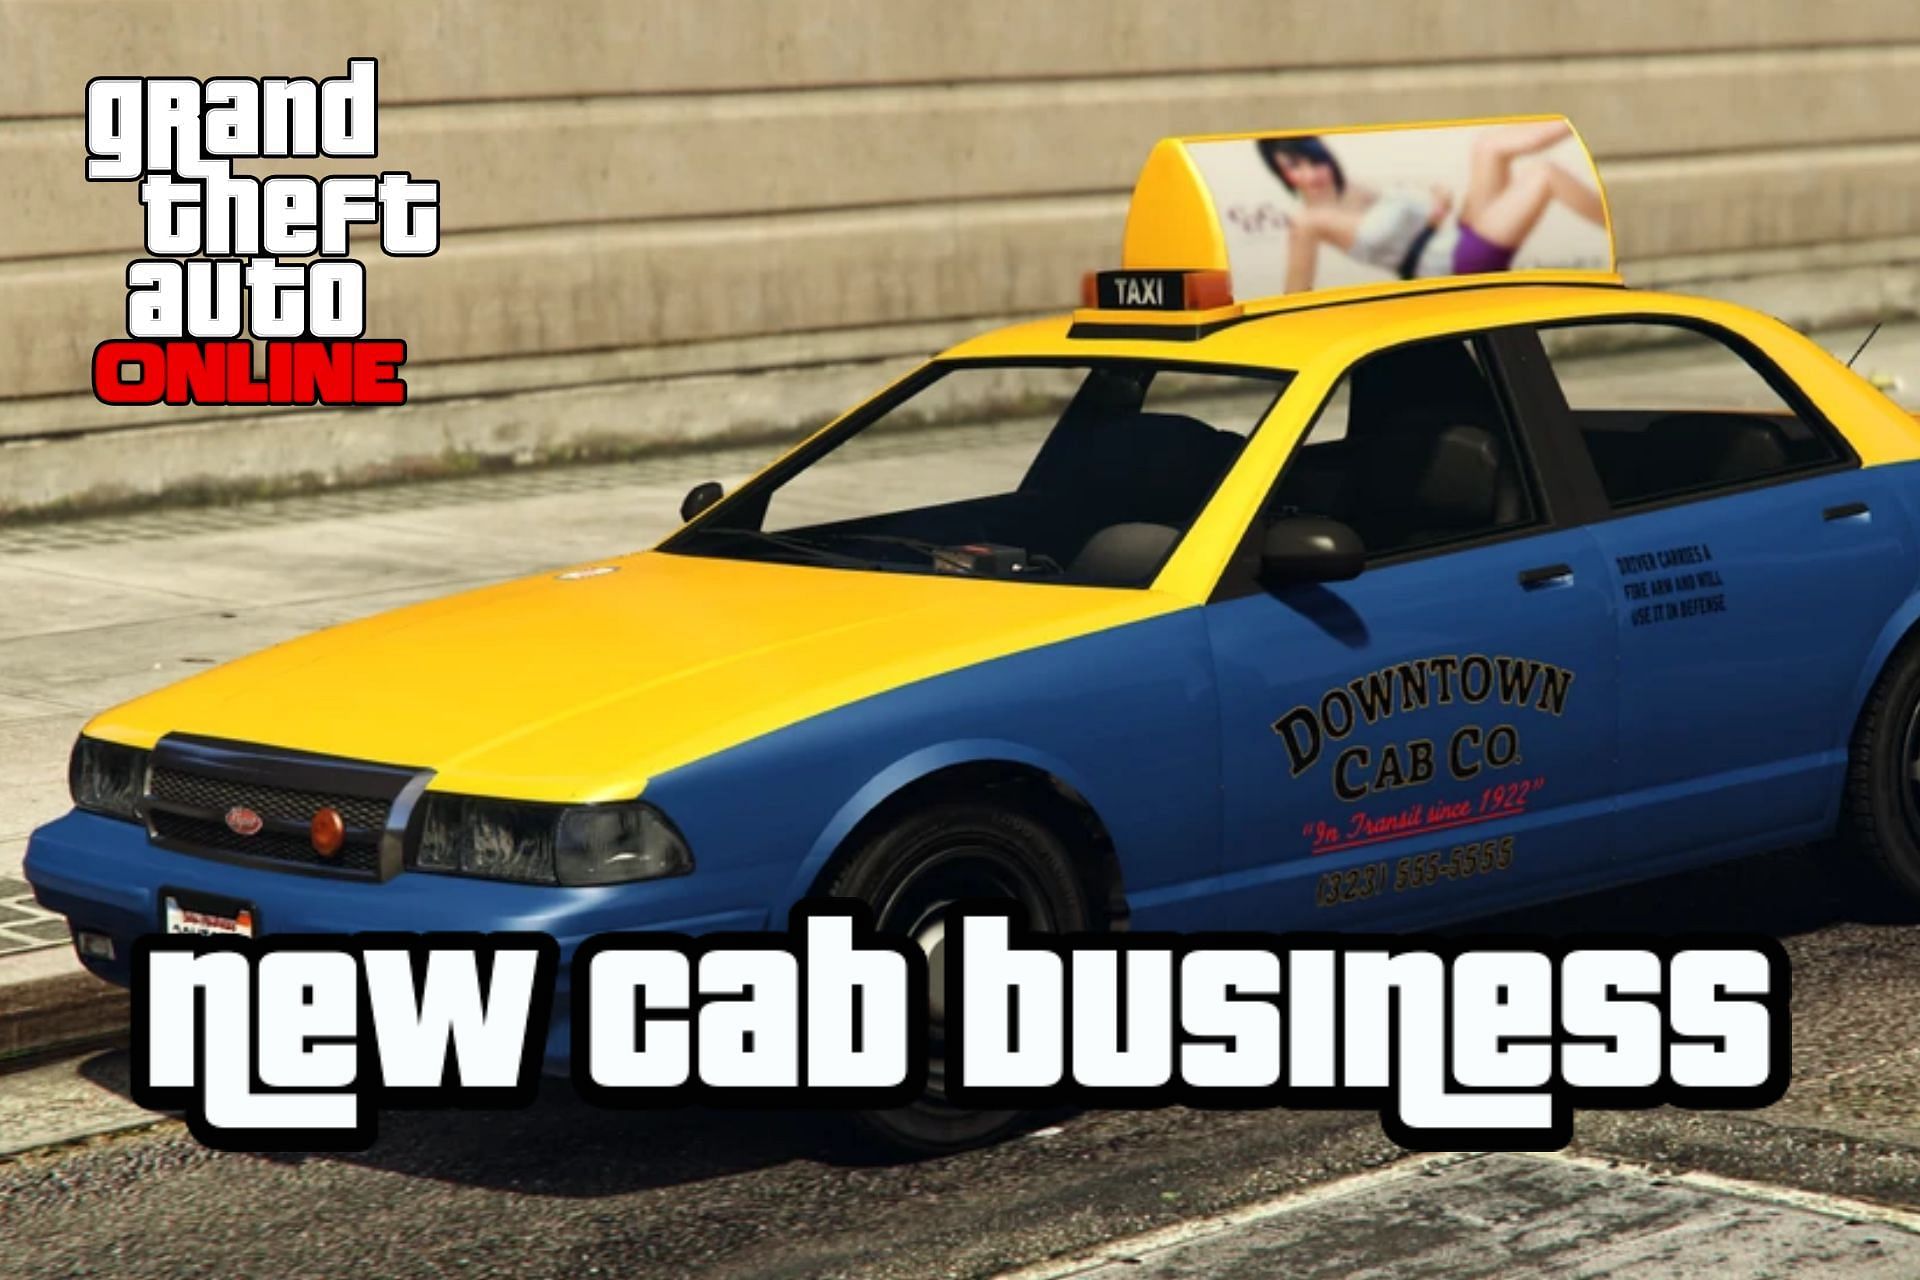 GTA Online players can now become cab drivers with the Los Santos Drug Wars update (Image via Rockstar Games)